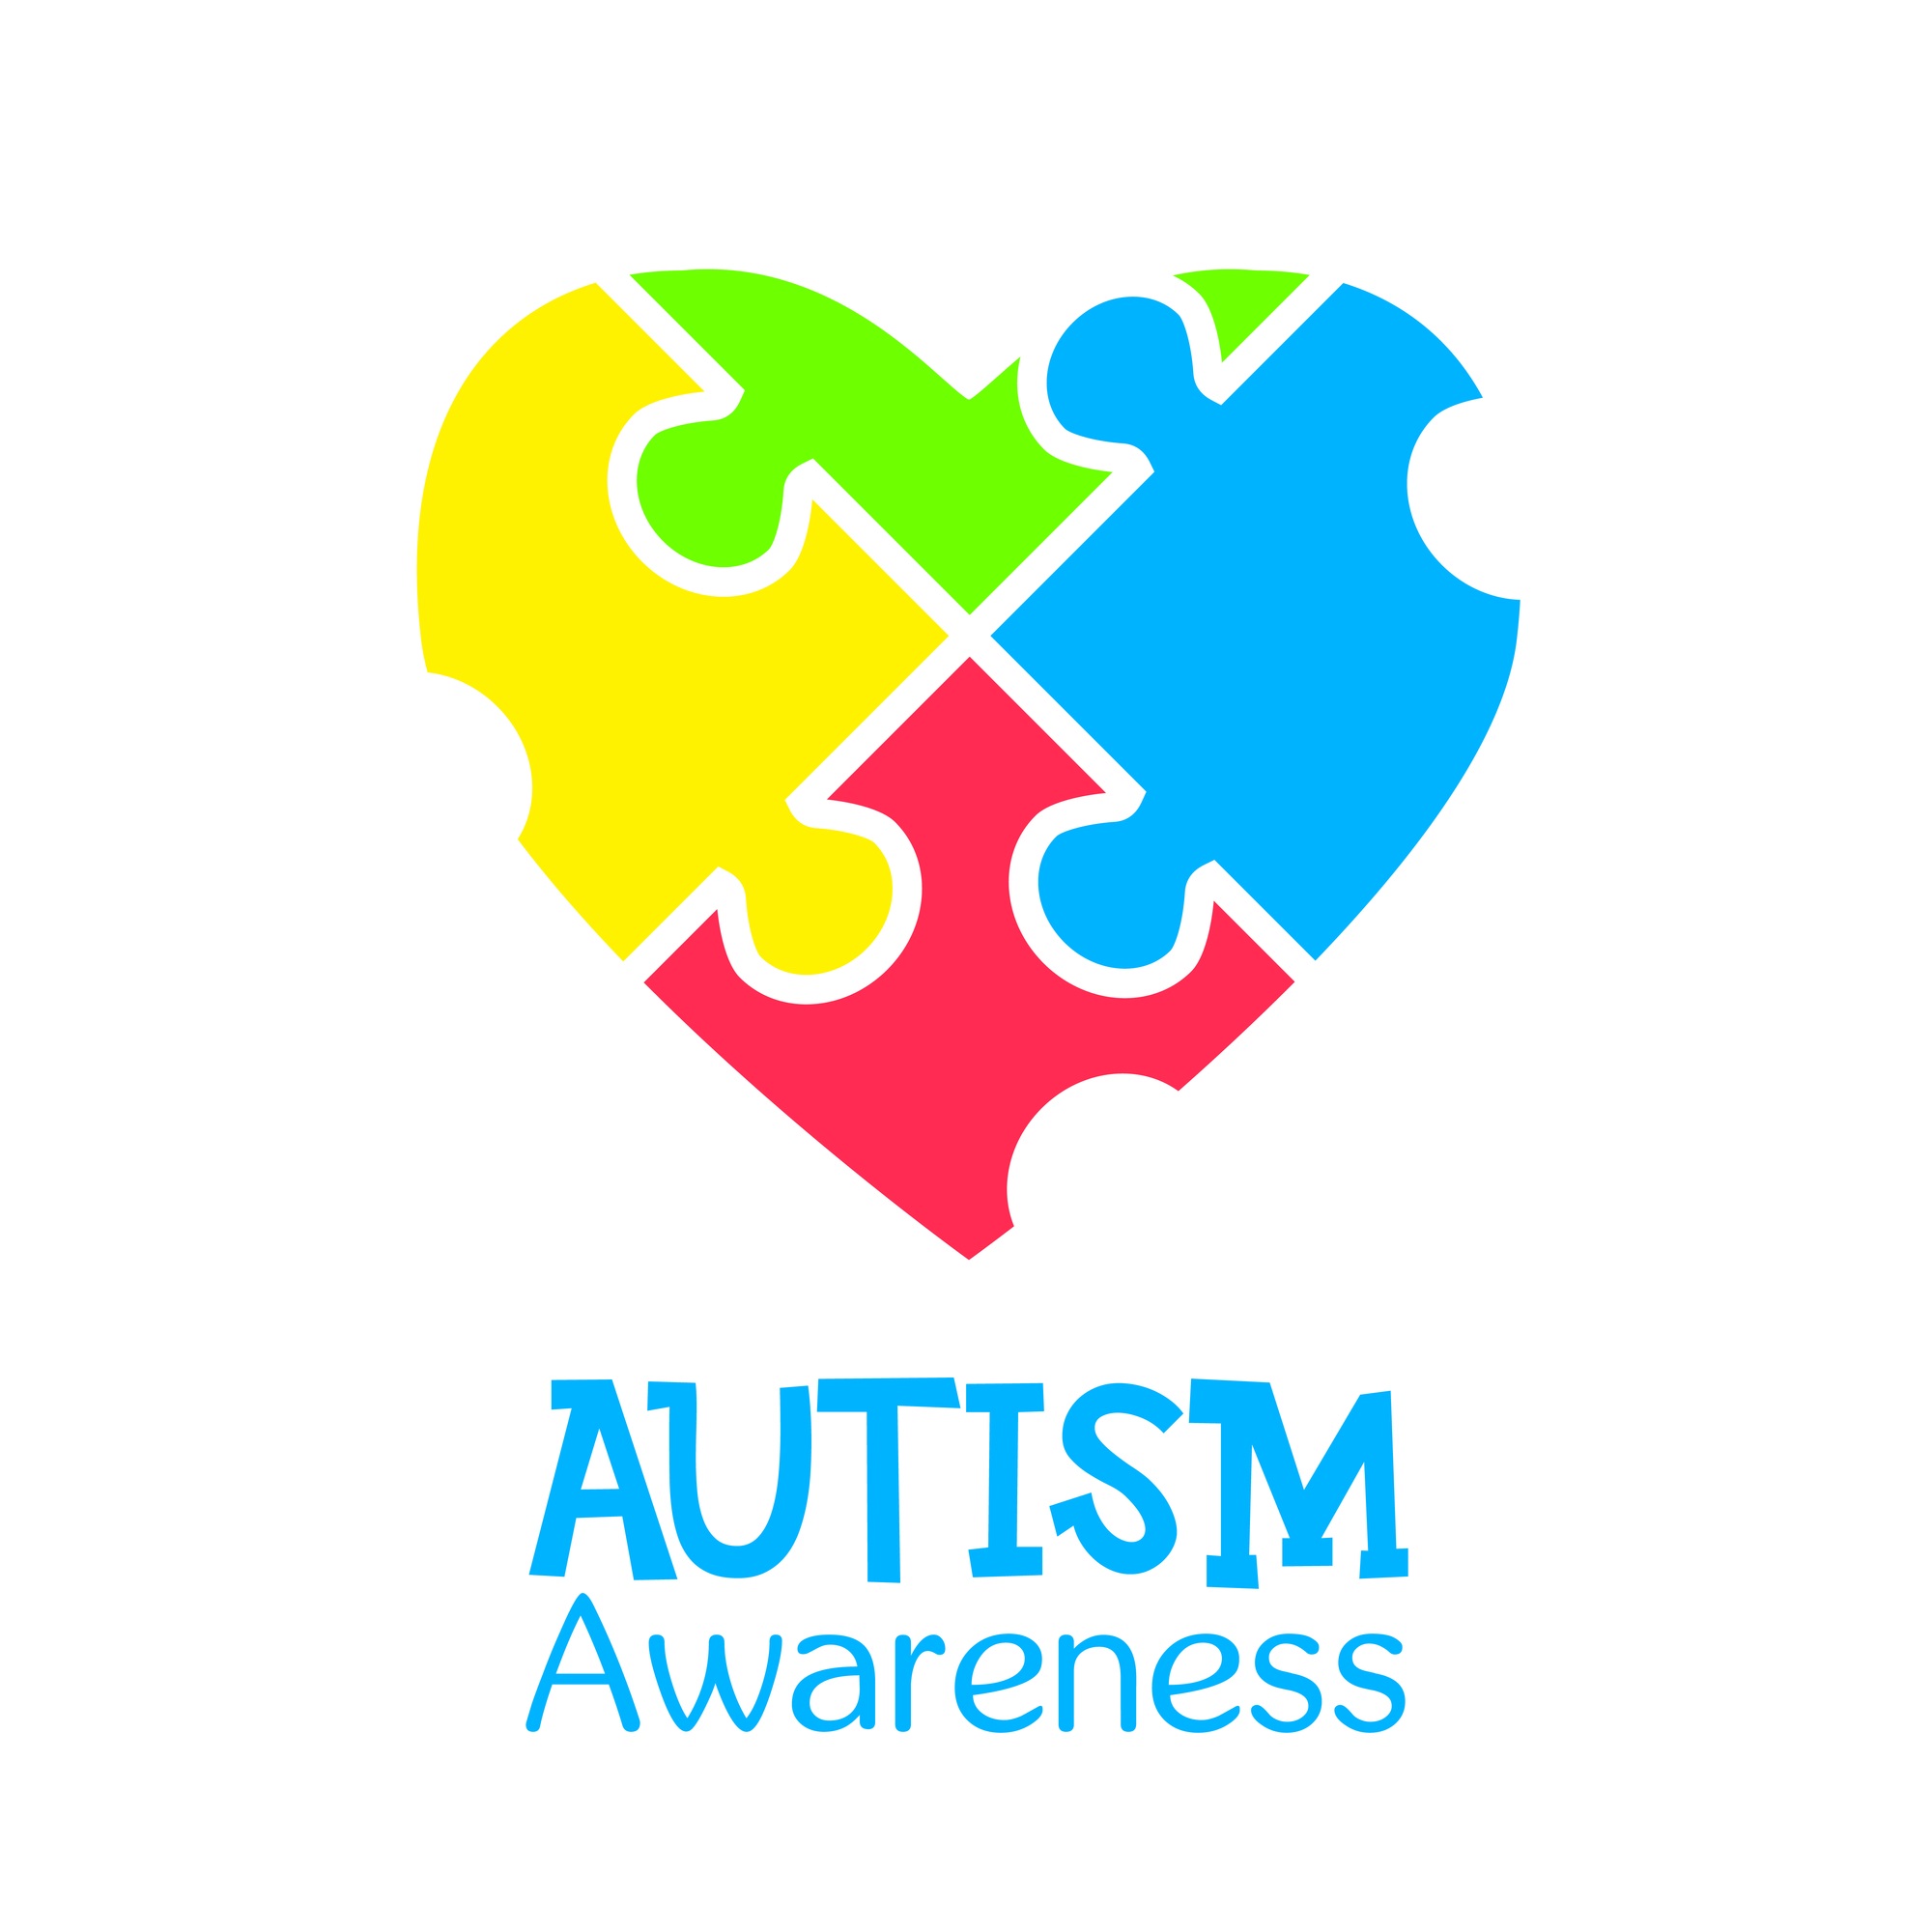 Autism awareness day in Chicago